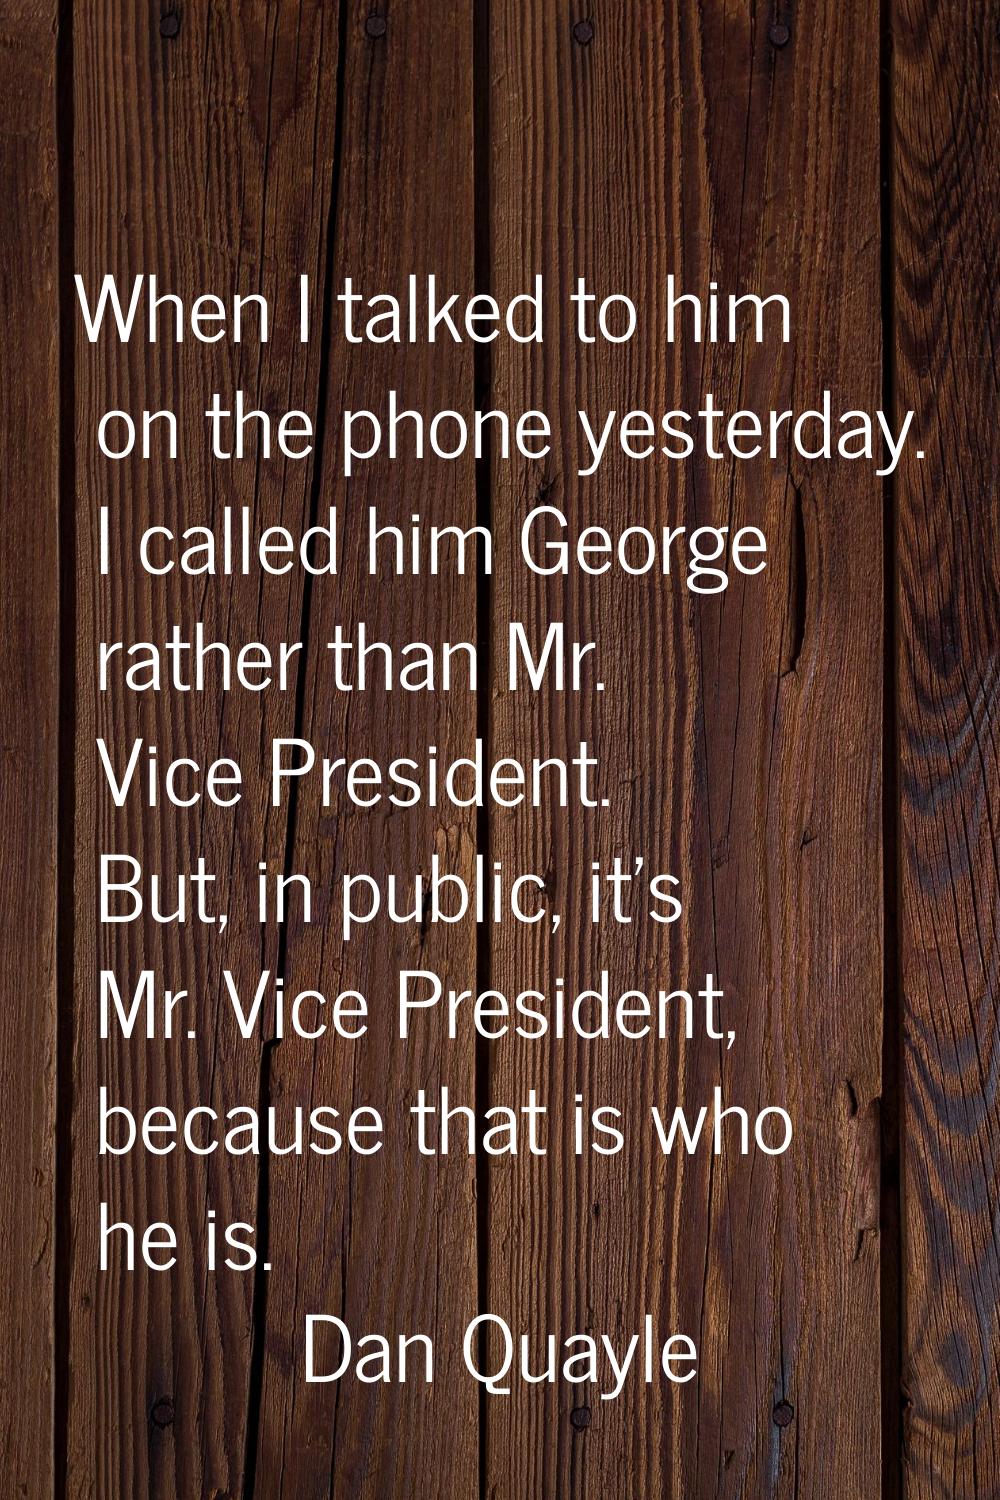 When I talked to him on the phone yesterday. I called him George rather than Mr. Vice President. Bu